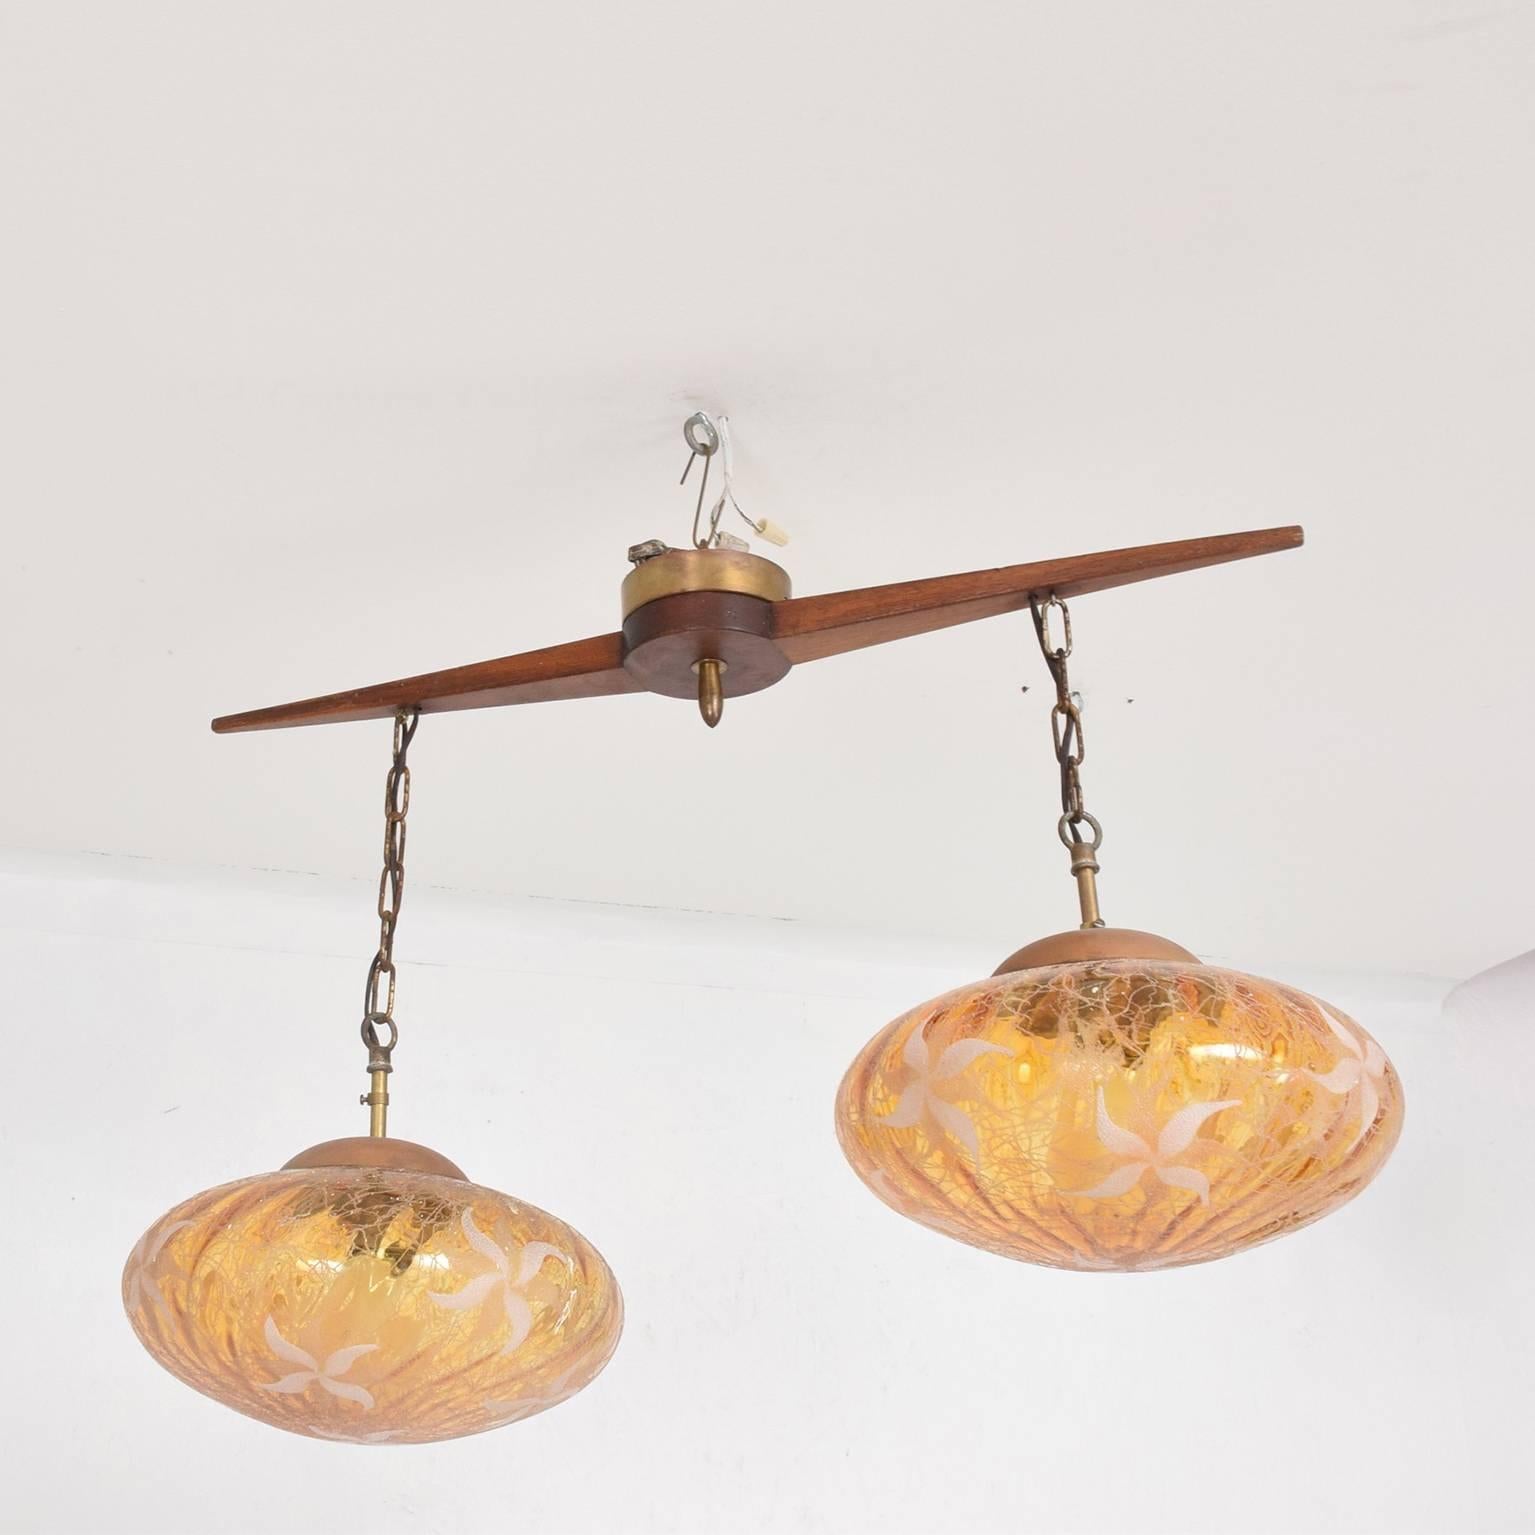 For your consideration, a Mid-Century Modern Mexican modernist chandelier with custom glass amber shades.
Dimensions: 19